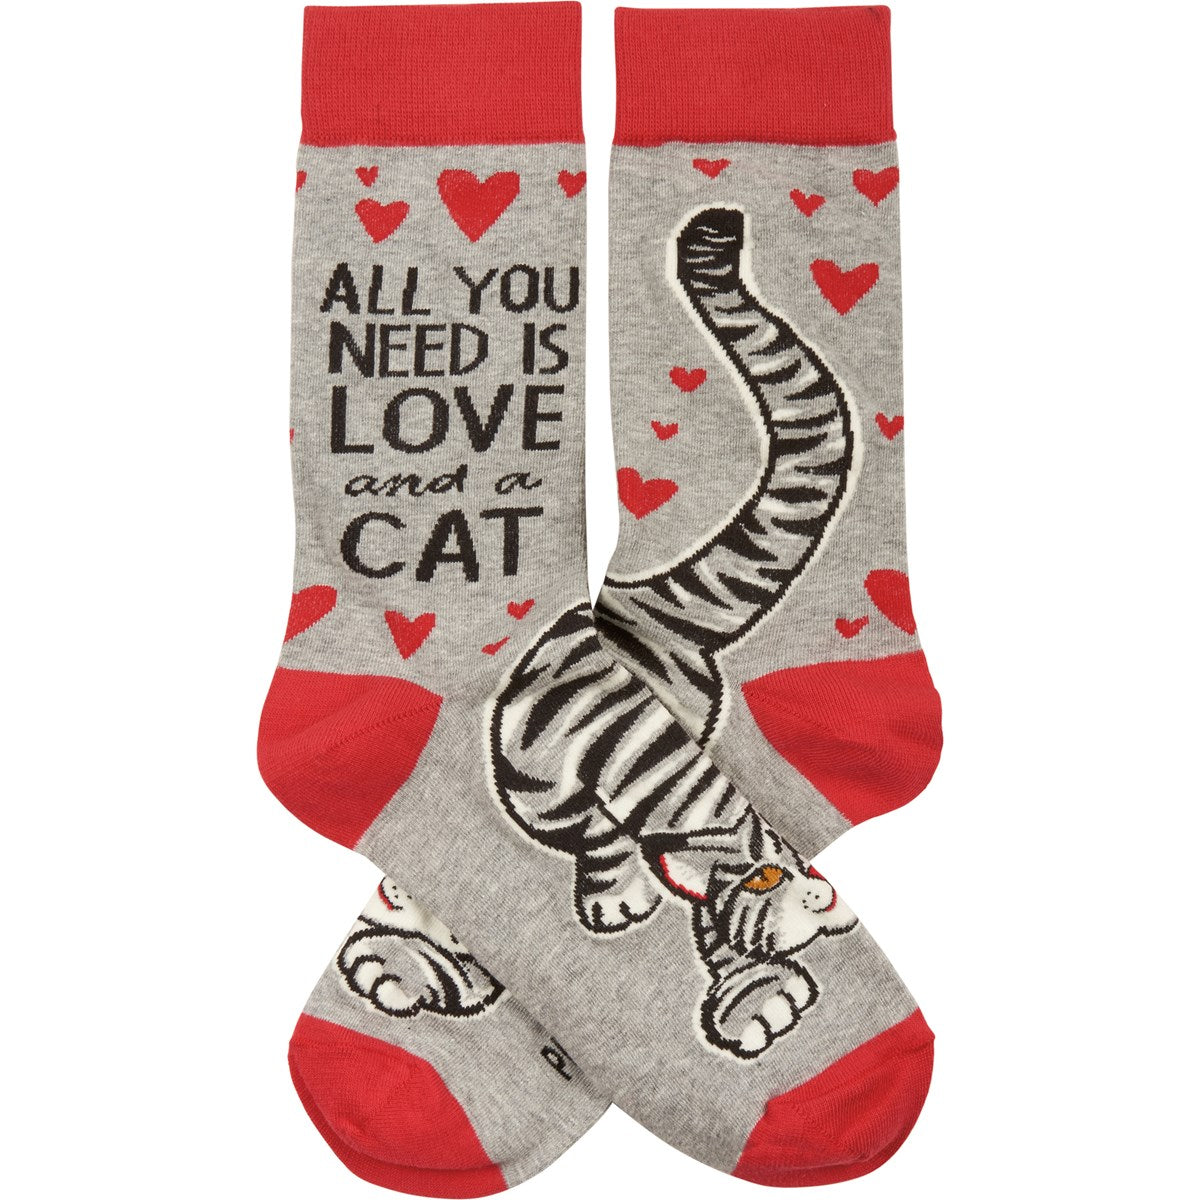 Love and a Cat grey socks with red toe, heal and band, "all you need is love and a cat" text